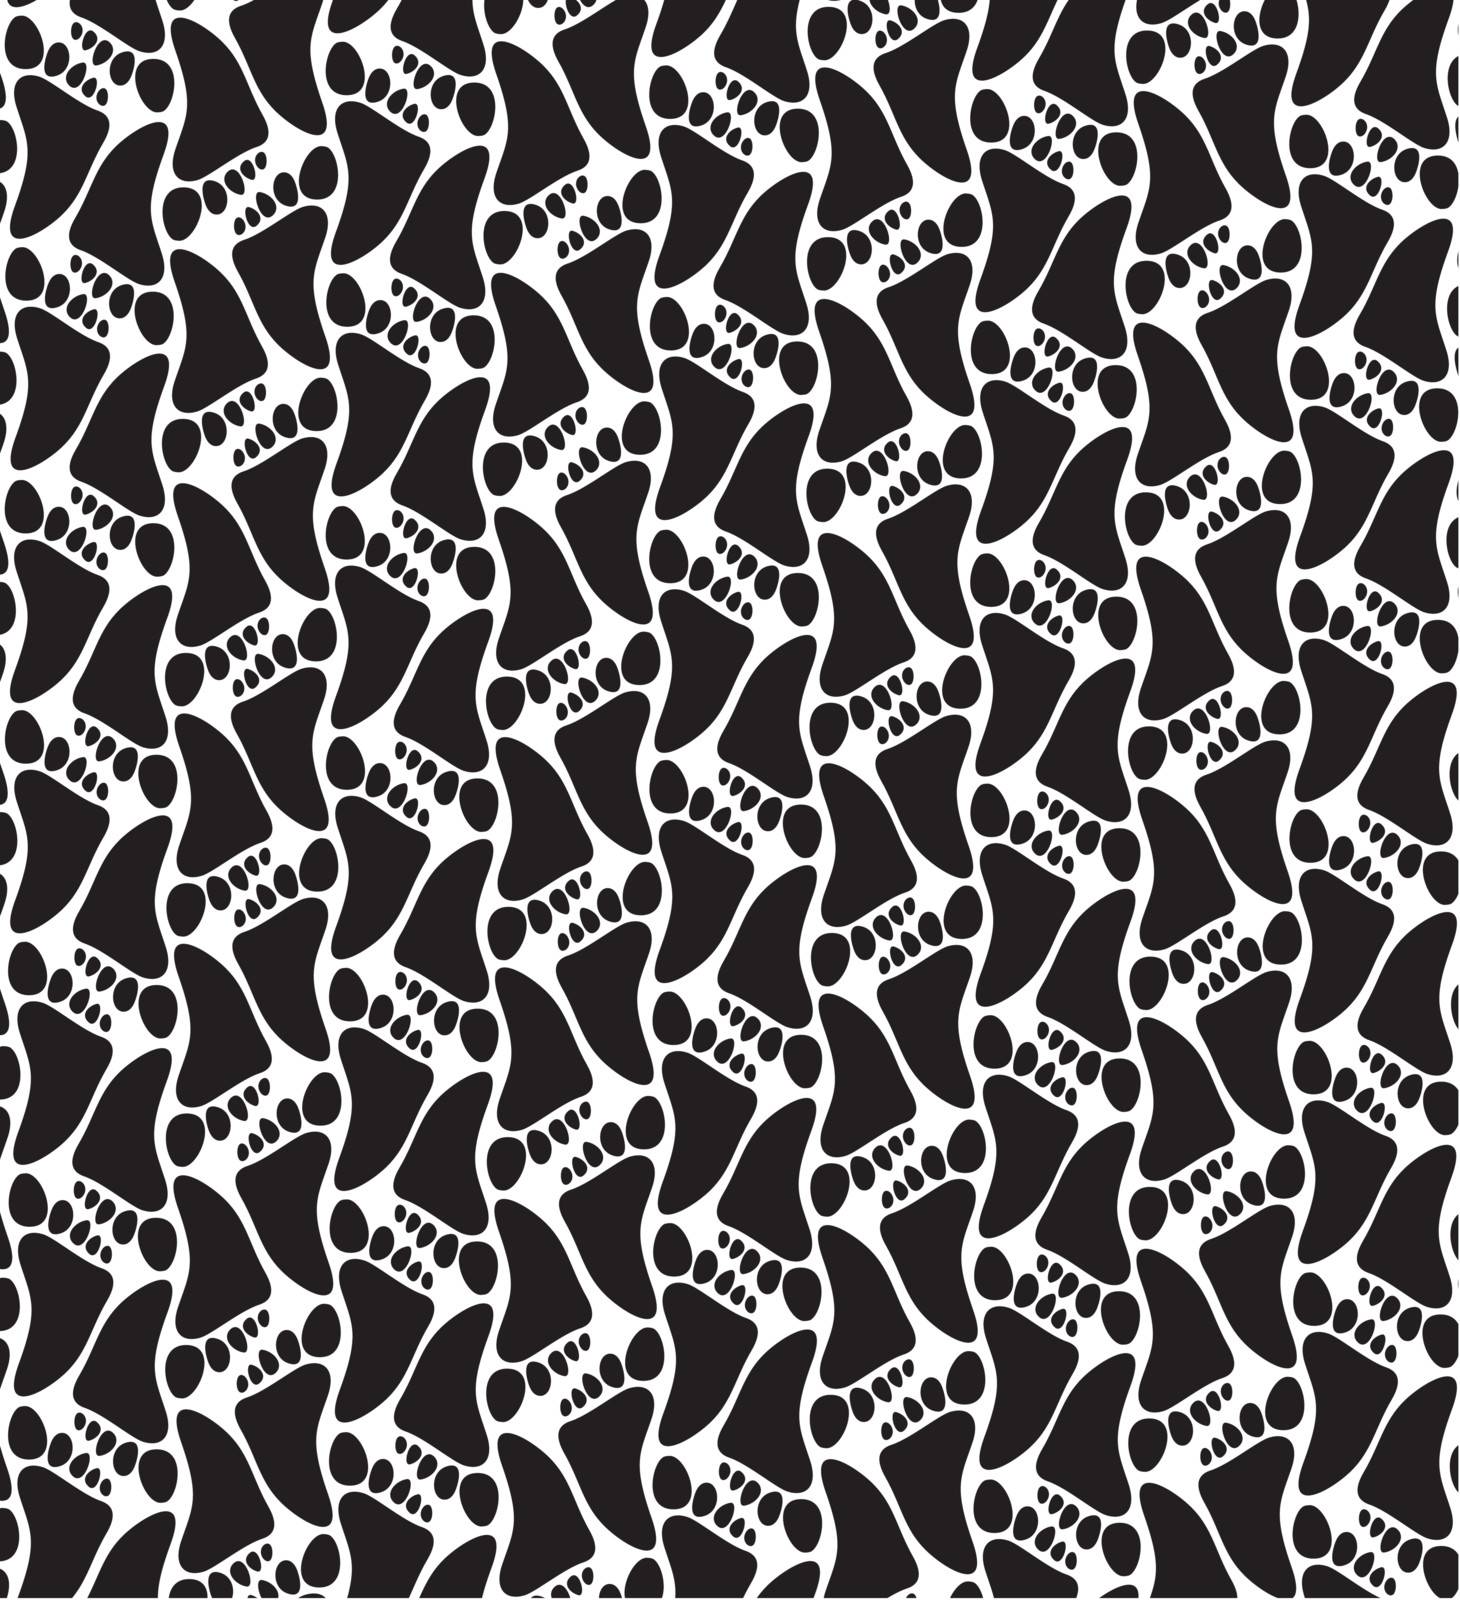 vector feet seamles background, black and white